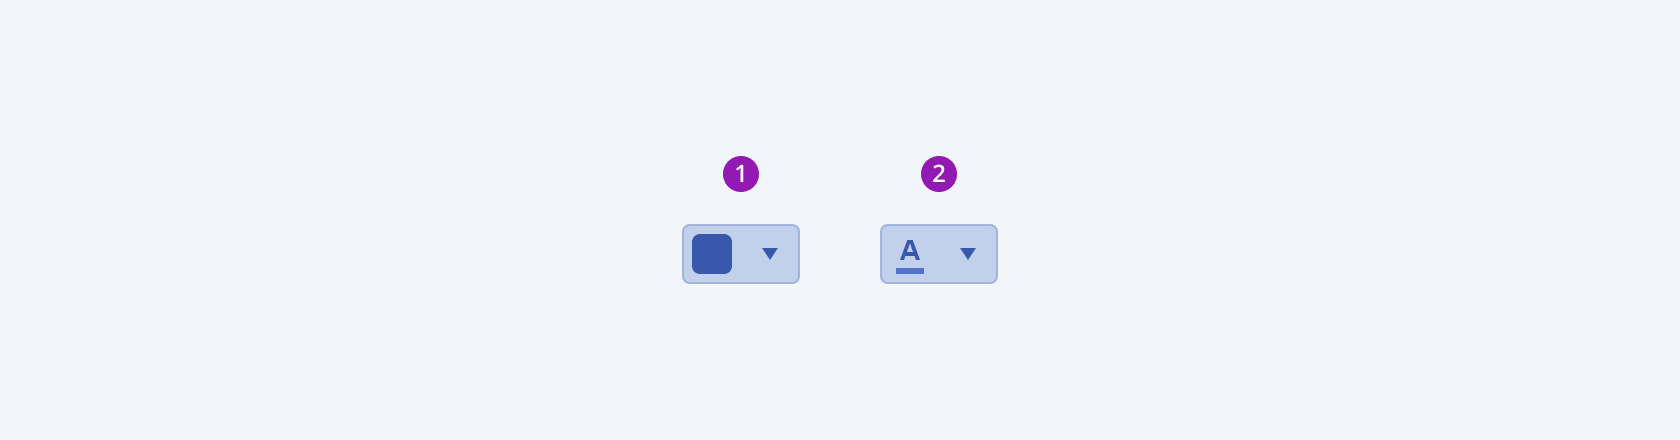 Two variants of a Telerik and Kendo UI ColorPicker component showing color swatch and icon with a color indicator